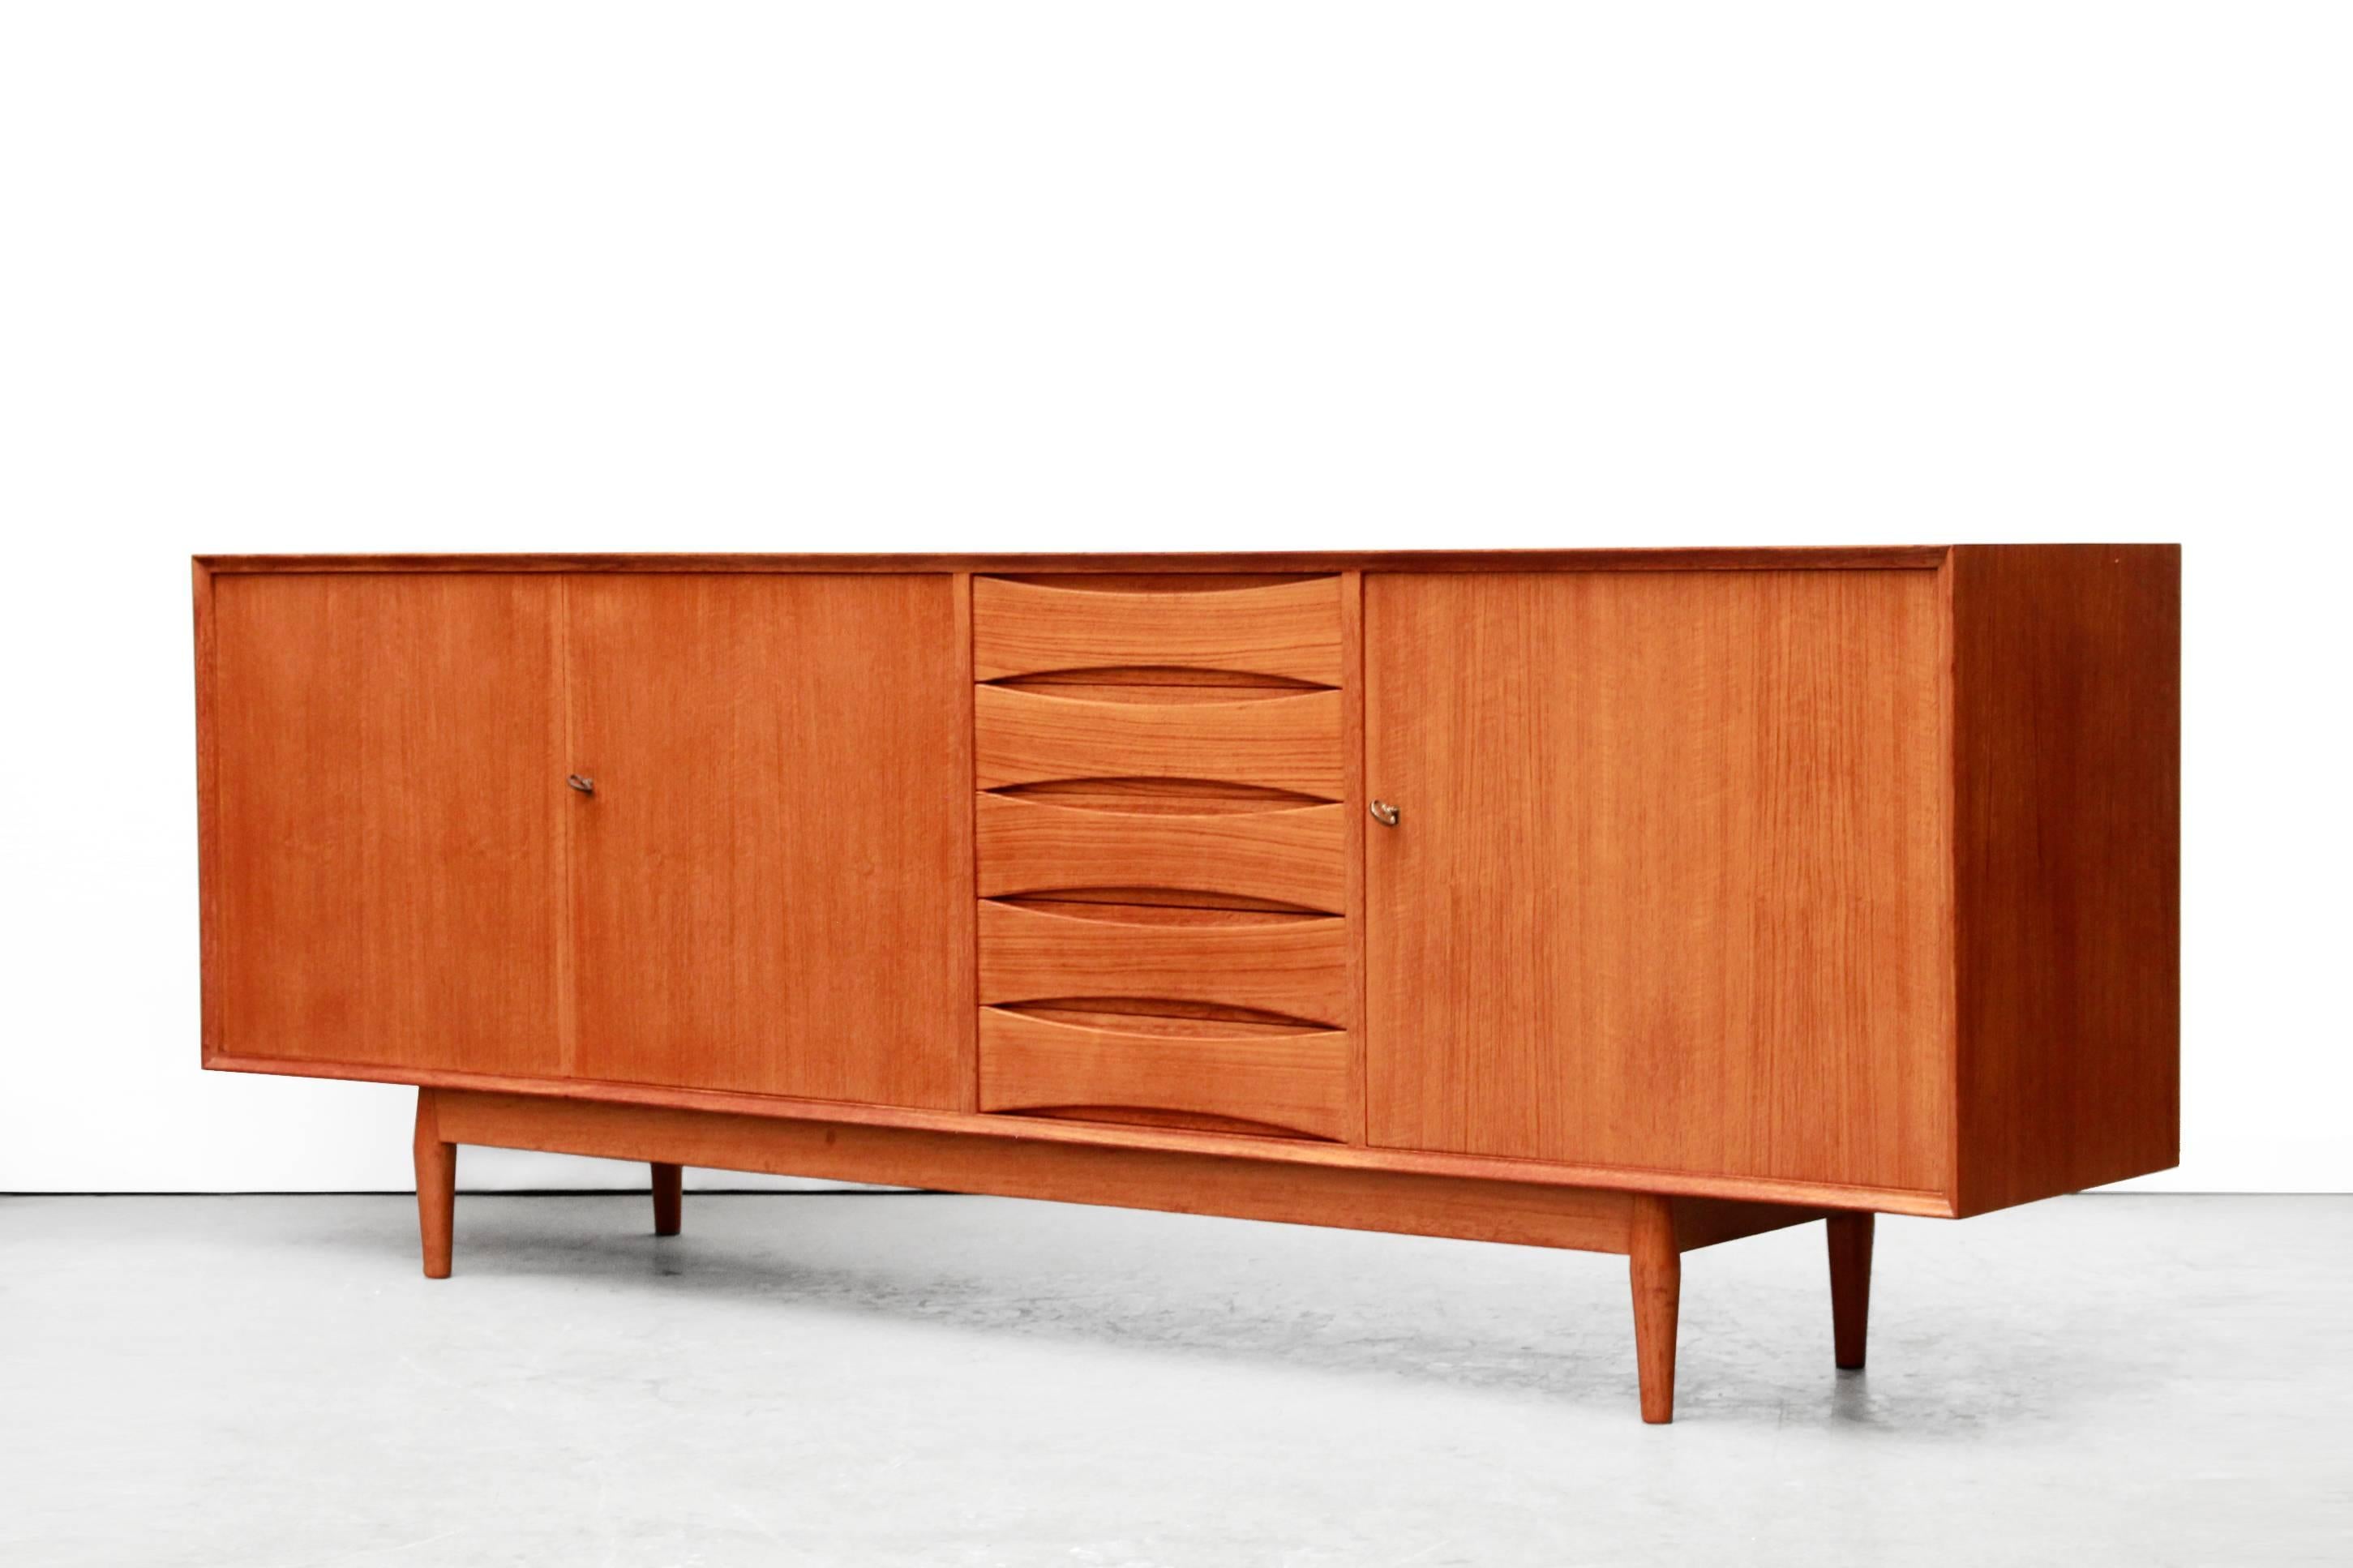 This sideboard is made from teak and features three doors and five drawers. Its design is reminiscent of Arne Vodder. The sideboard was purchased in Belgium, which was purchased there in the 1960s.
This sideboard is of very high quality. The way